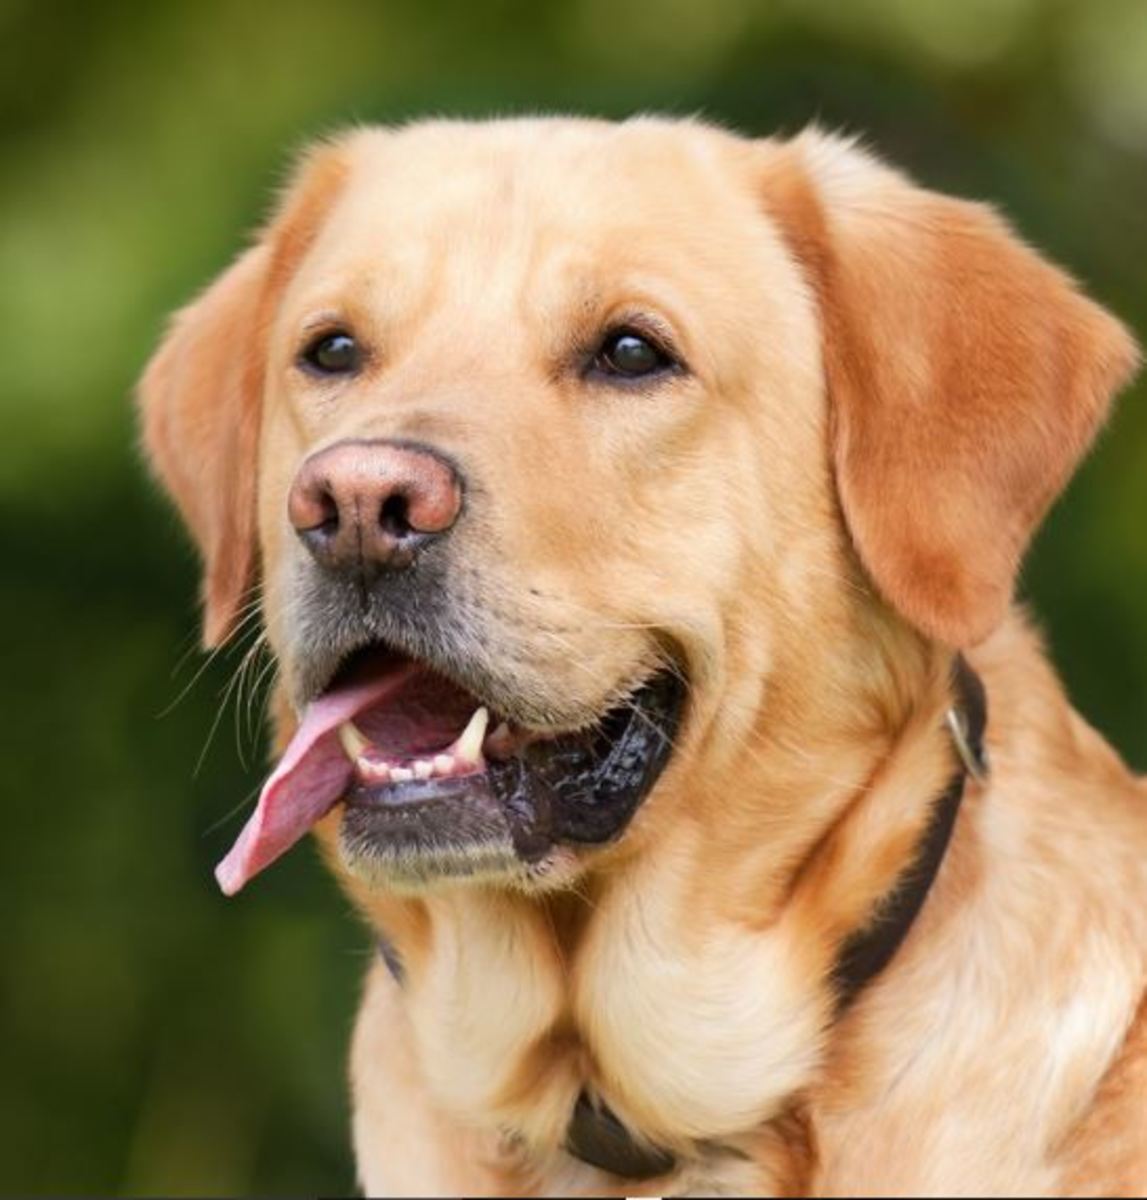  Spleen tumors are common in large dogs, particularly Labs, Goldens and German shepherds.